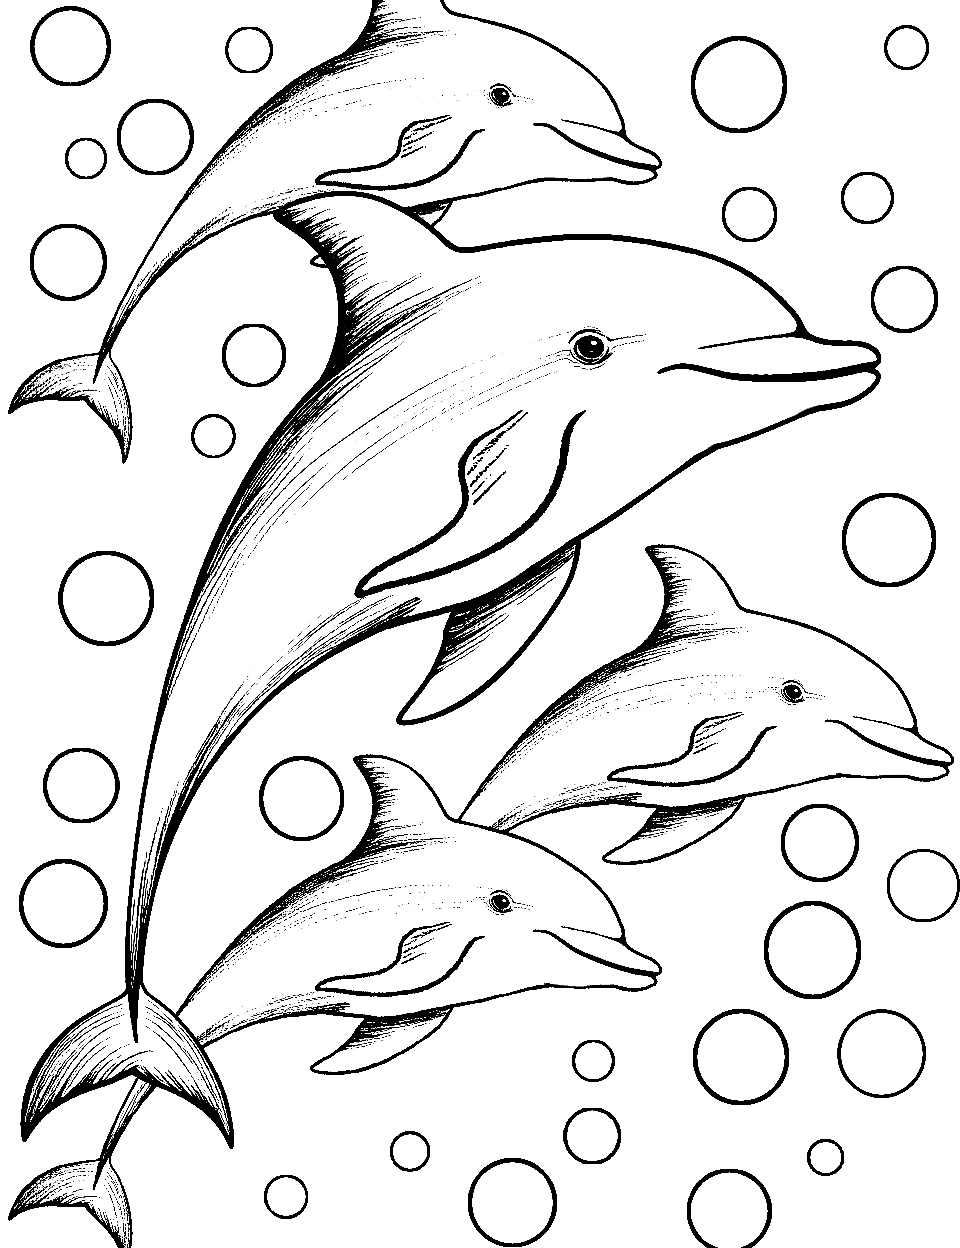 Exploring Dolphin Pod Coloring Page - A pod of dolphins gracefully gliding through the clear, expansive ocean together.